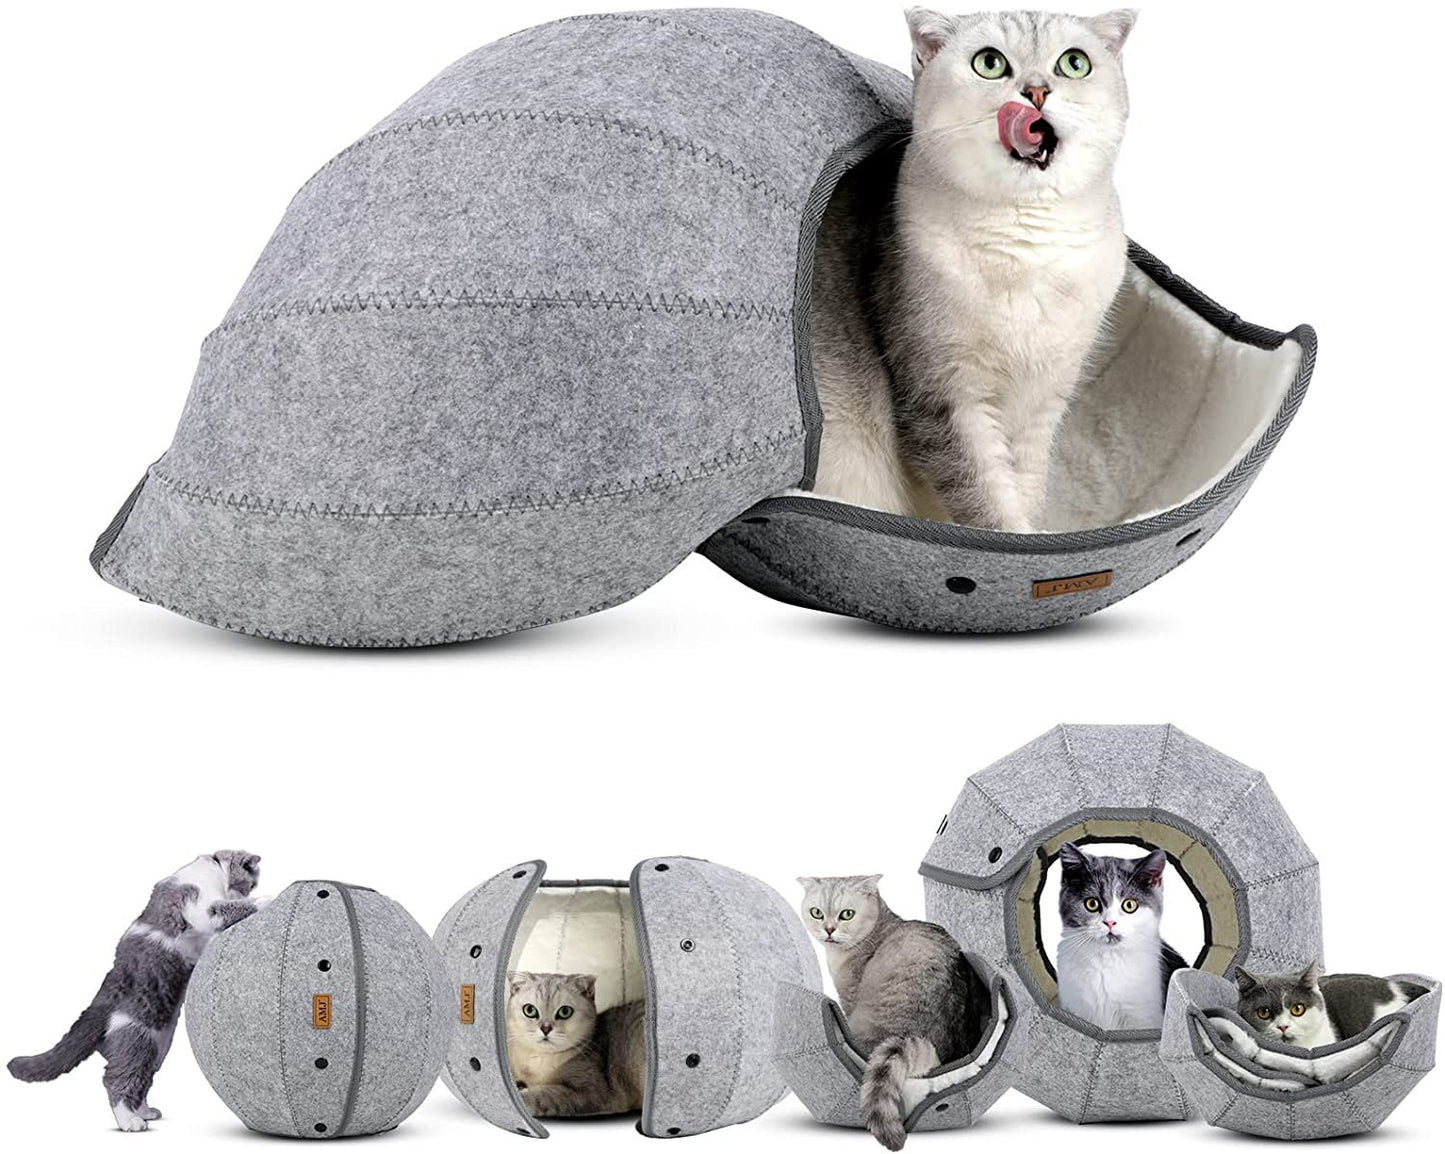 Foldable Breathable Pet Bed Cat Kennel Cave Tunnel Semi-Enclosed Creative Cat Mat Cat And Dog Supplies DromedarShop.com Online Boutique